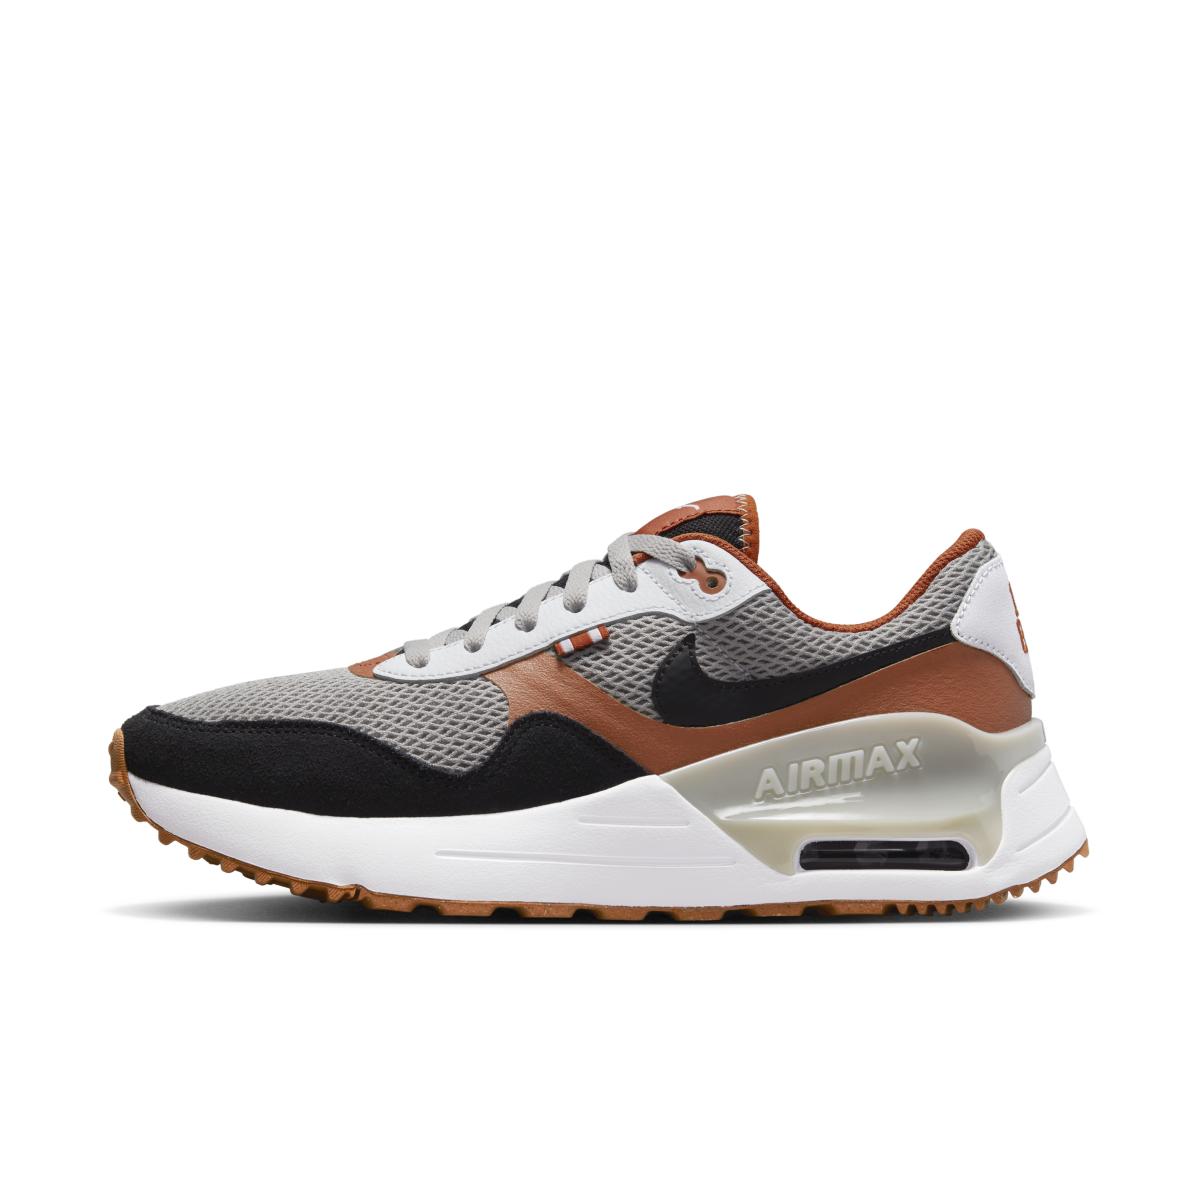 University of Texas Collaborates with Corona to Create 12 Pairs of Custom  Nike Air Max 1s - Texas Sneakers